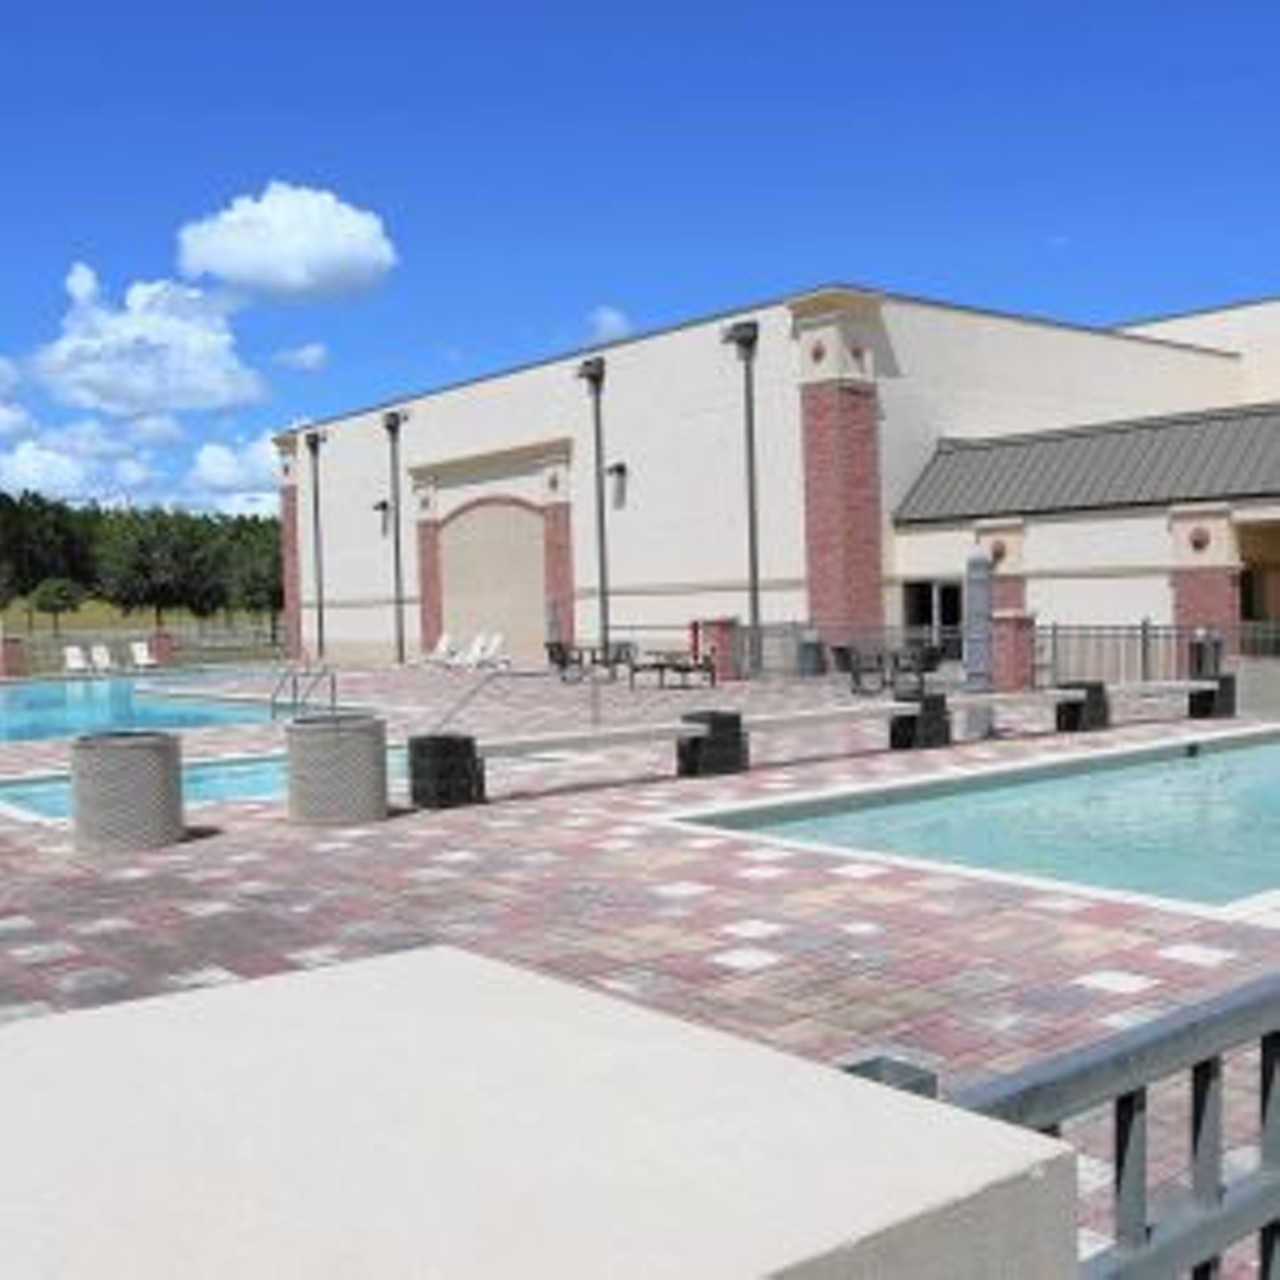 Clermont Florida Government 
3700 S. Highway 27, Clermont, FL 34711, (352) 394-3500
Open swim hours are offered Sunday-Friday from 2-5 p.m. and Saturday from 9:30 a.m. to noon and 2-5 p.m. The entry fee for residents is $2 and for non-residents $3.
Photo via Fun4 Lake Kids